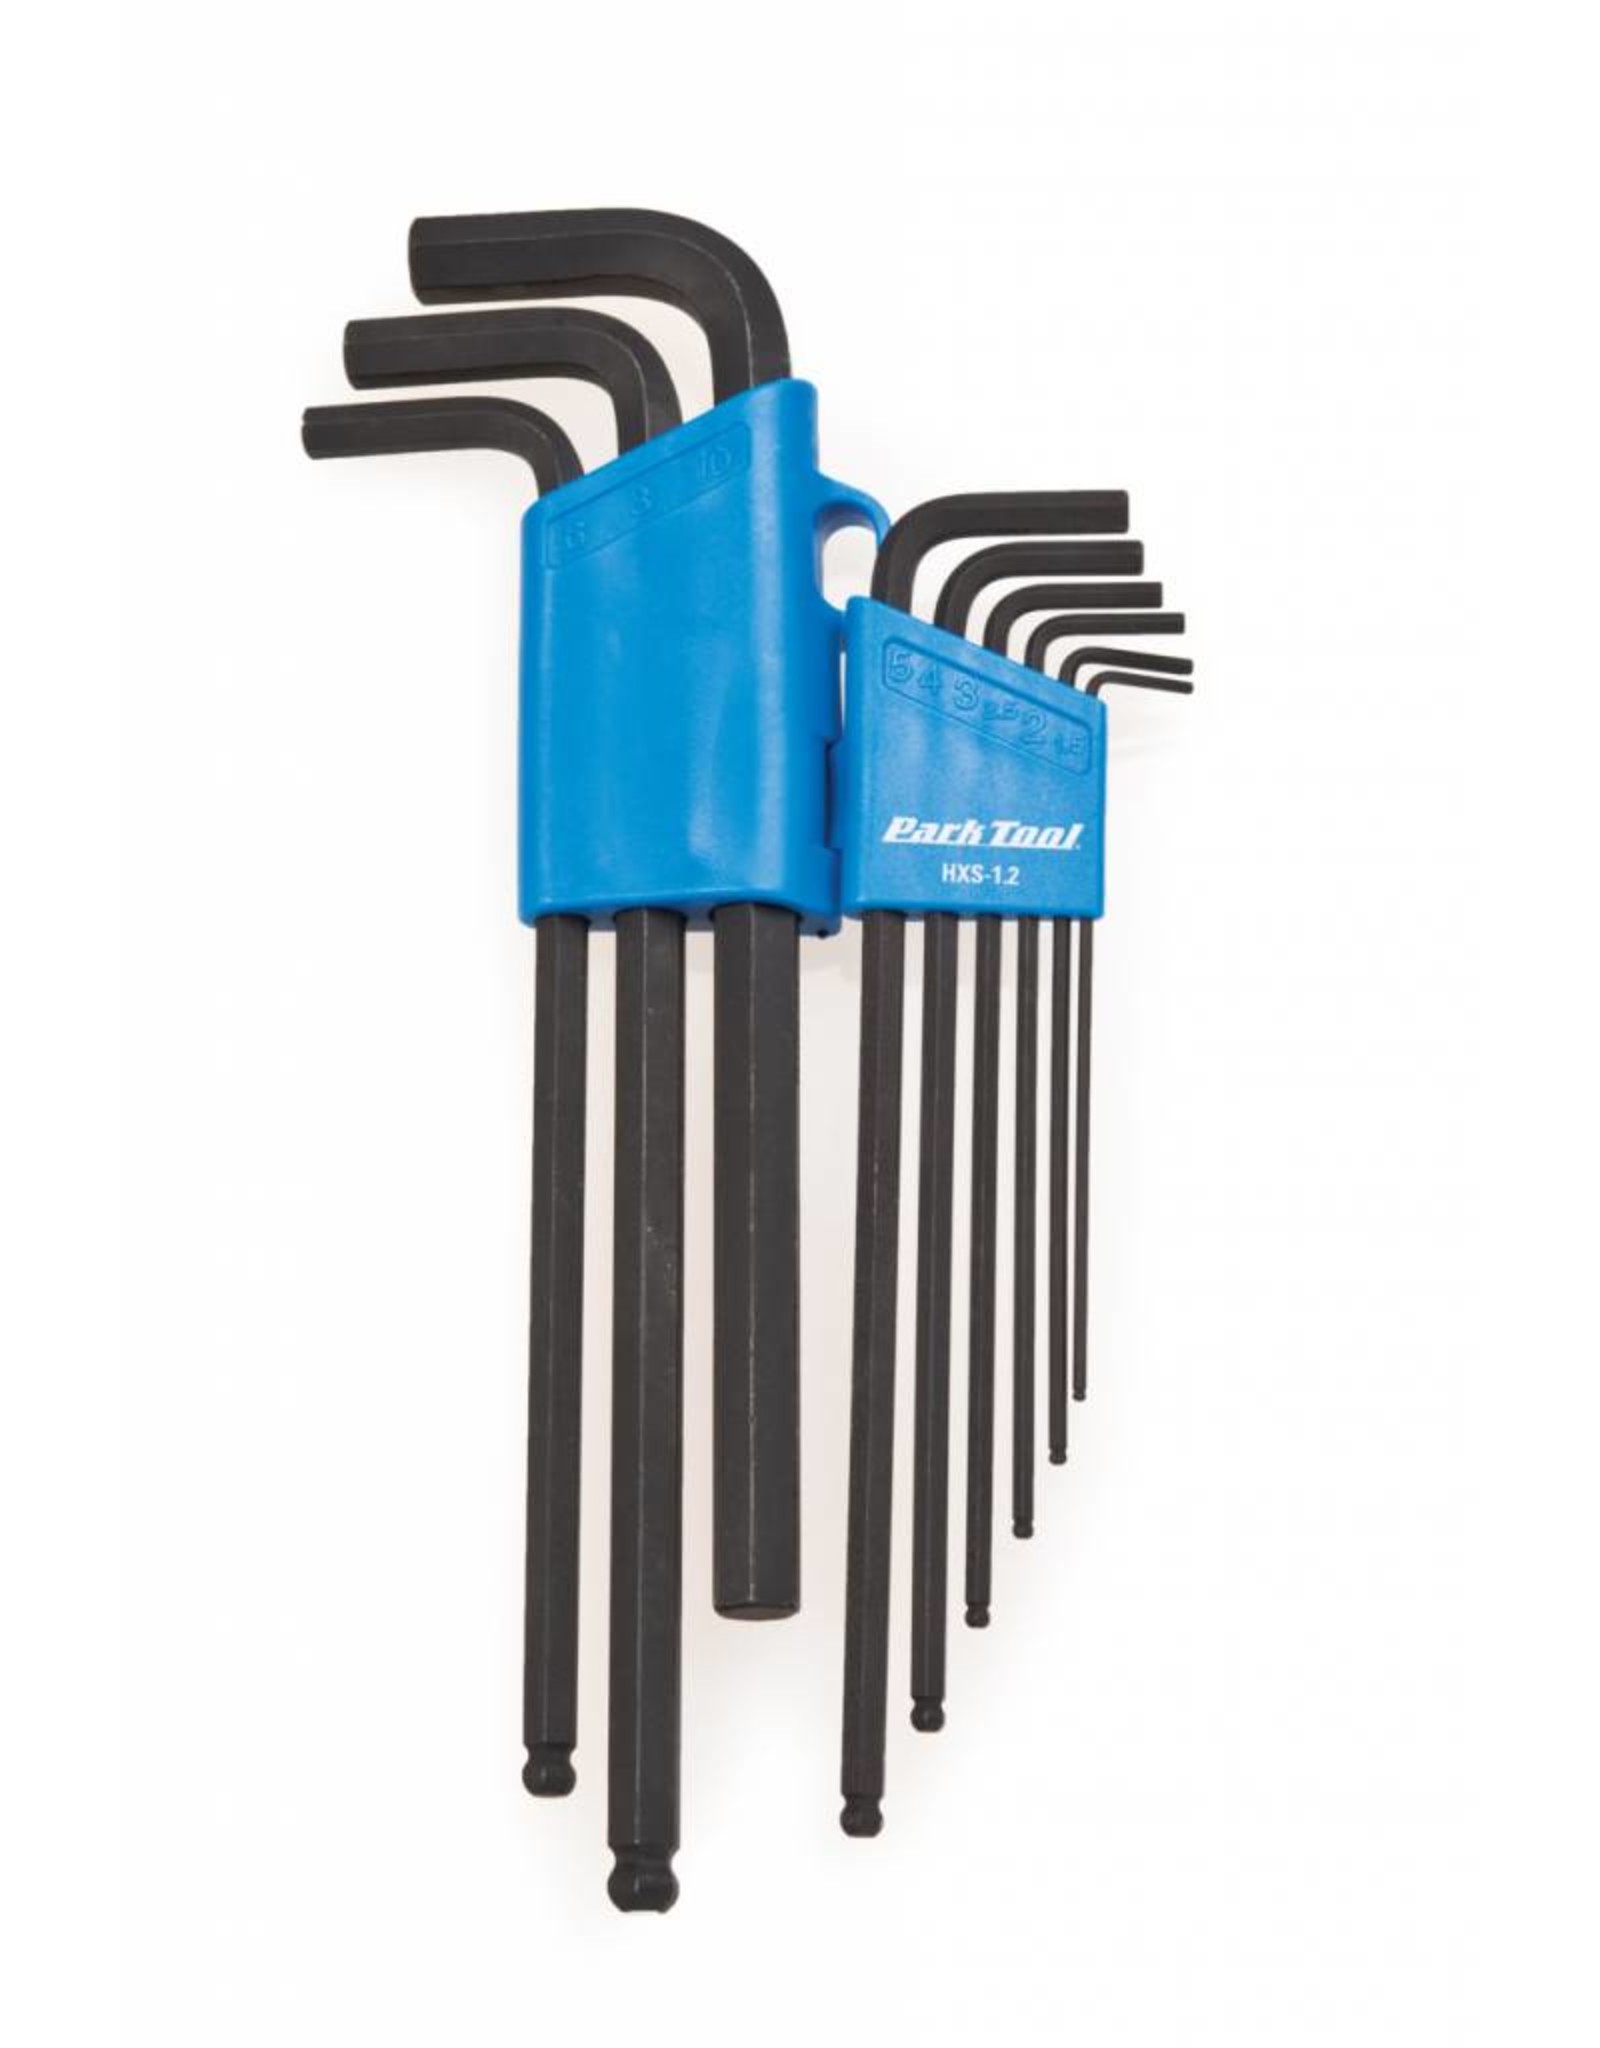 Park Tool, HXS-1.2, Professional L-shaped hex wrench set, 1.5mm, 2mm, 2.5mm, 3mm, 4mm, 5mm, 6mm, 8mm and 10mm